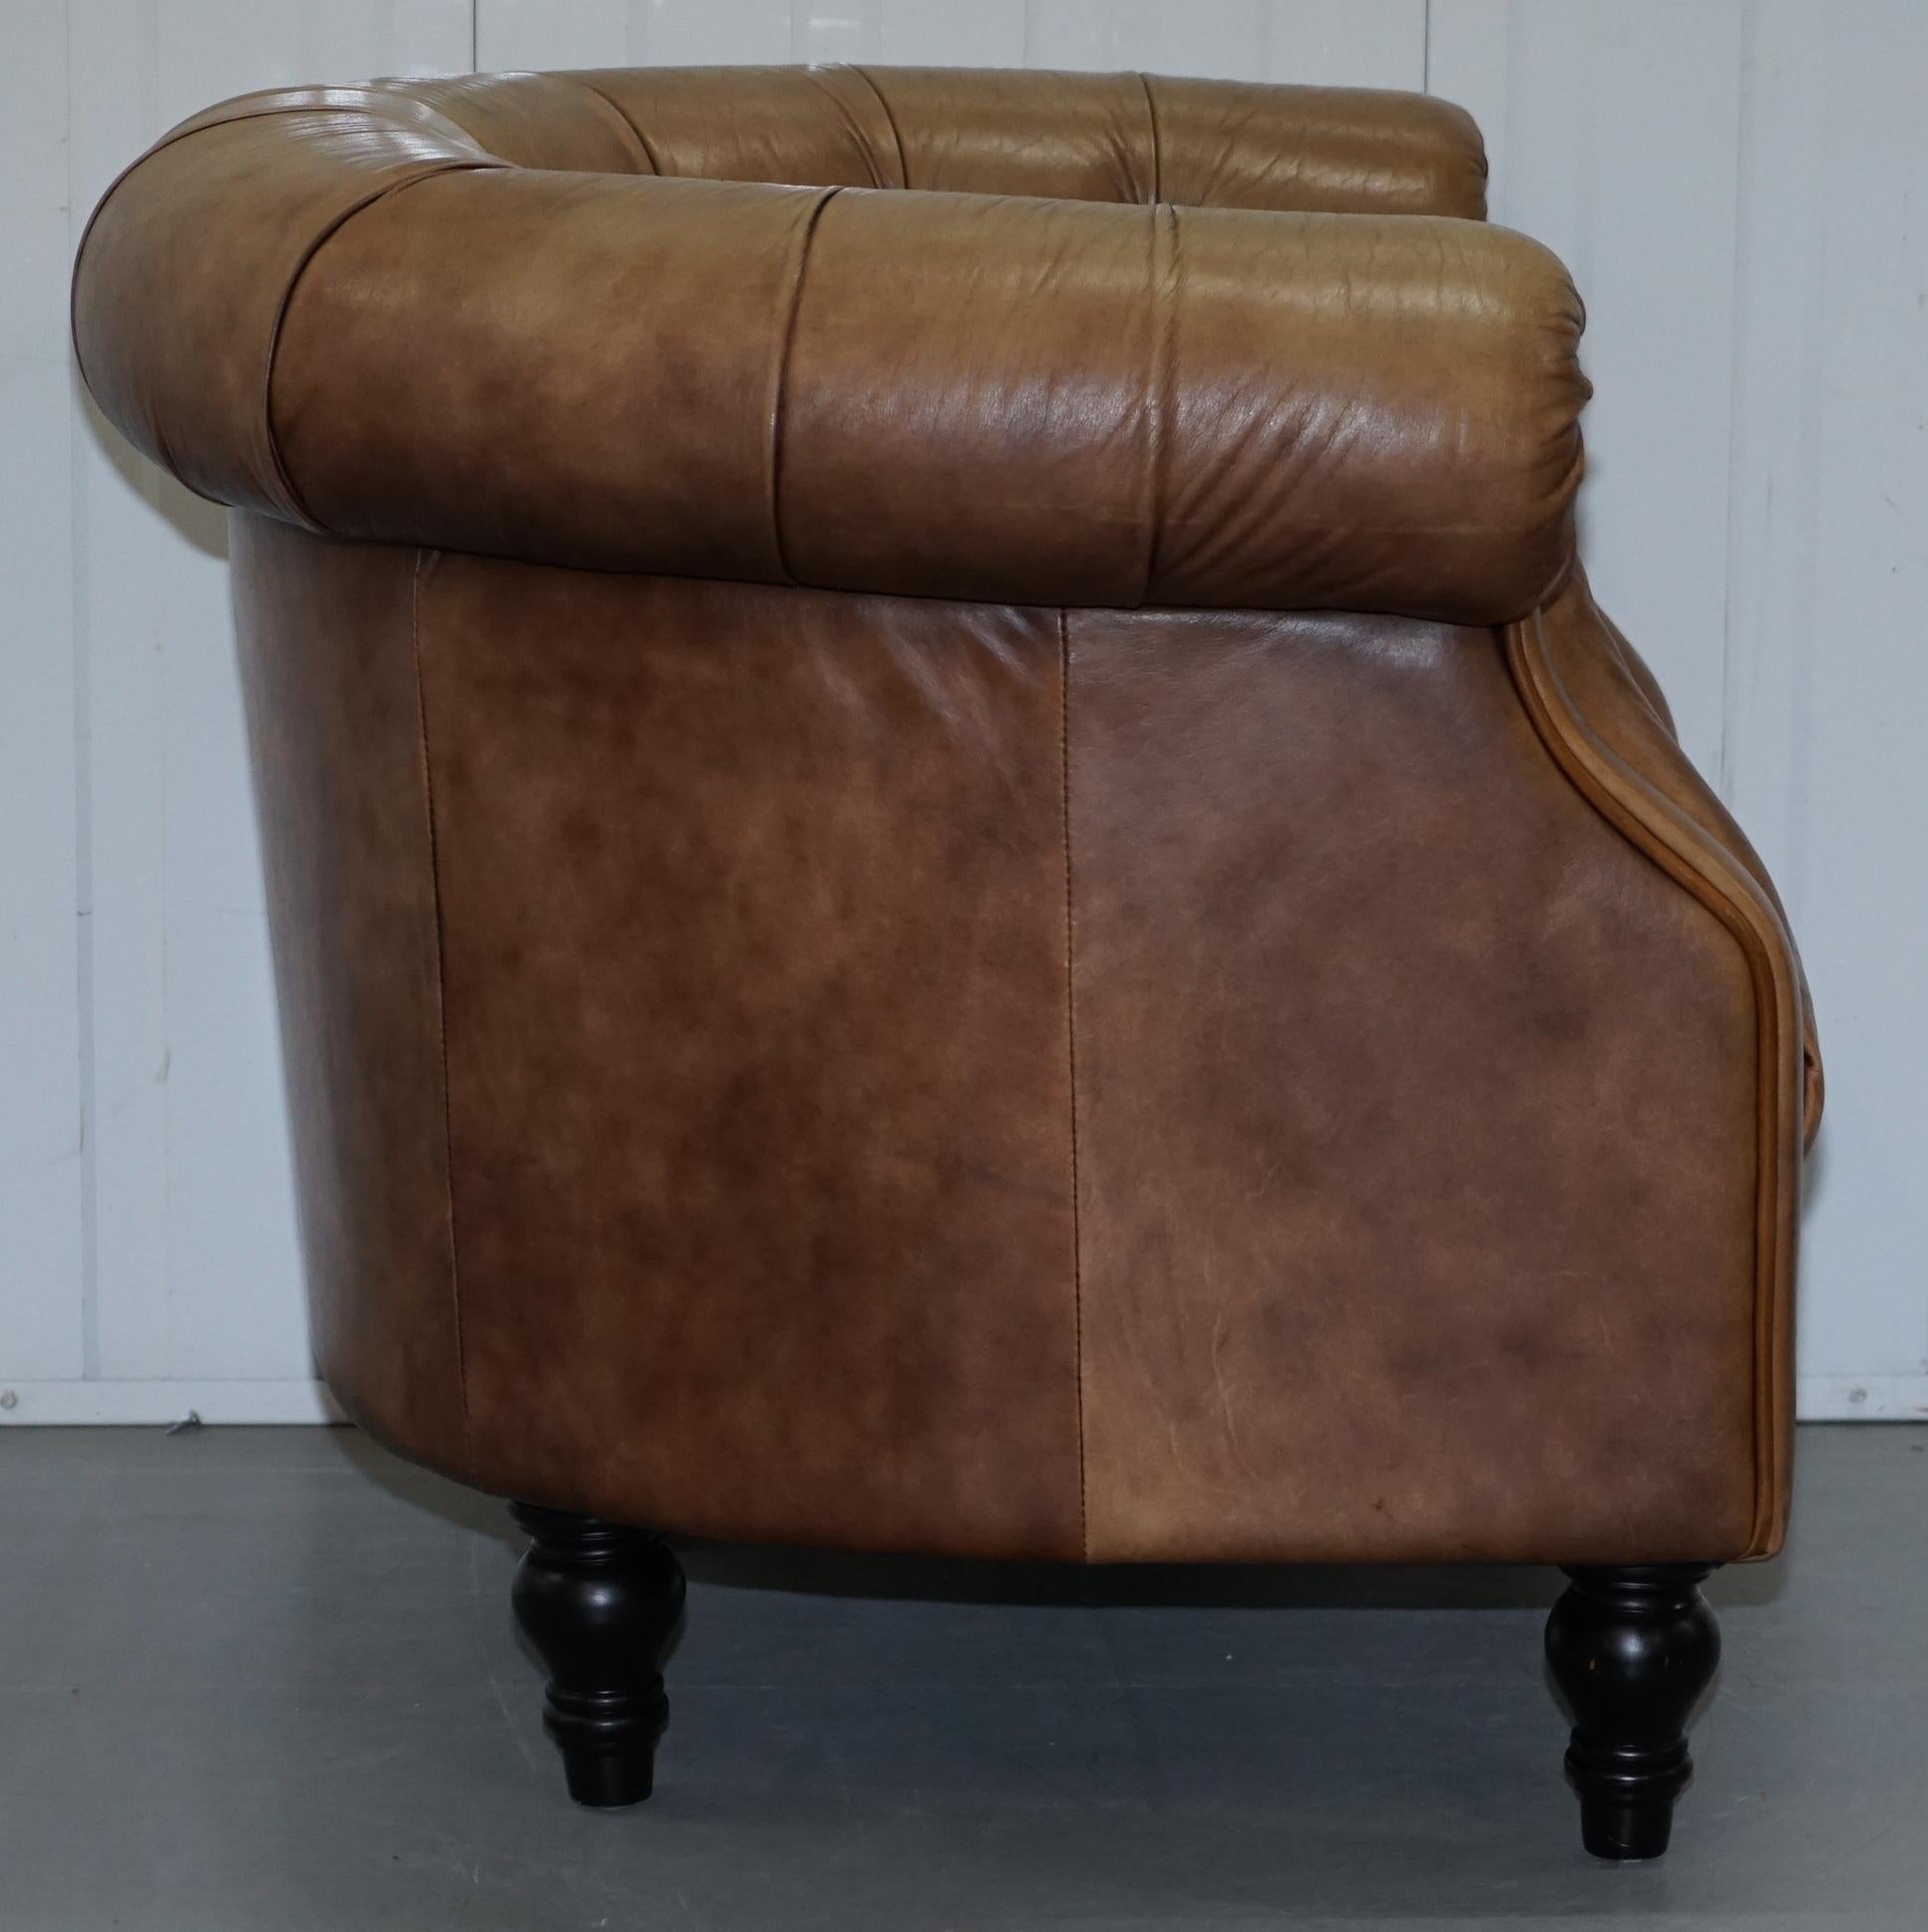 Vintage Tan Brown Leather Chesterfield Buttoned Club Tub Armchair Wood Legs 4